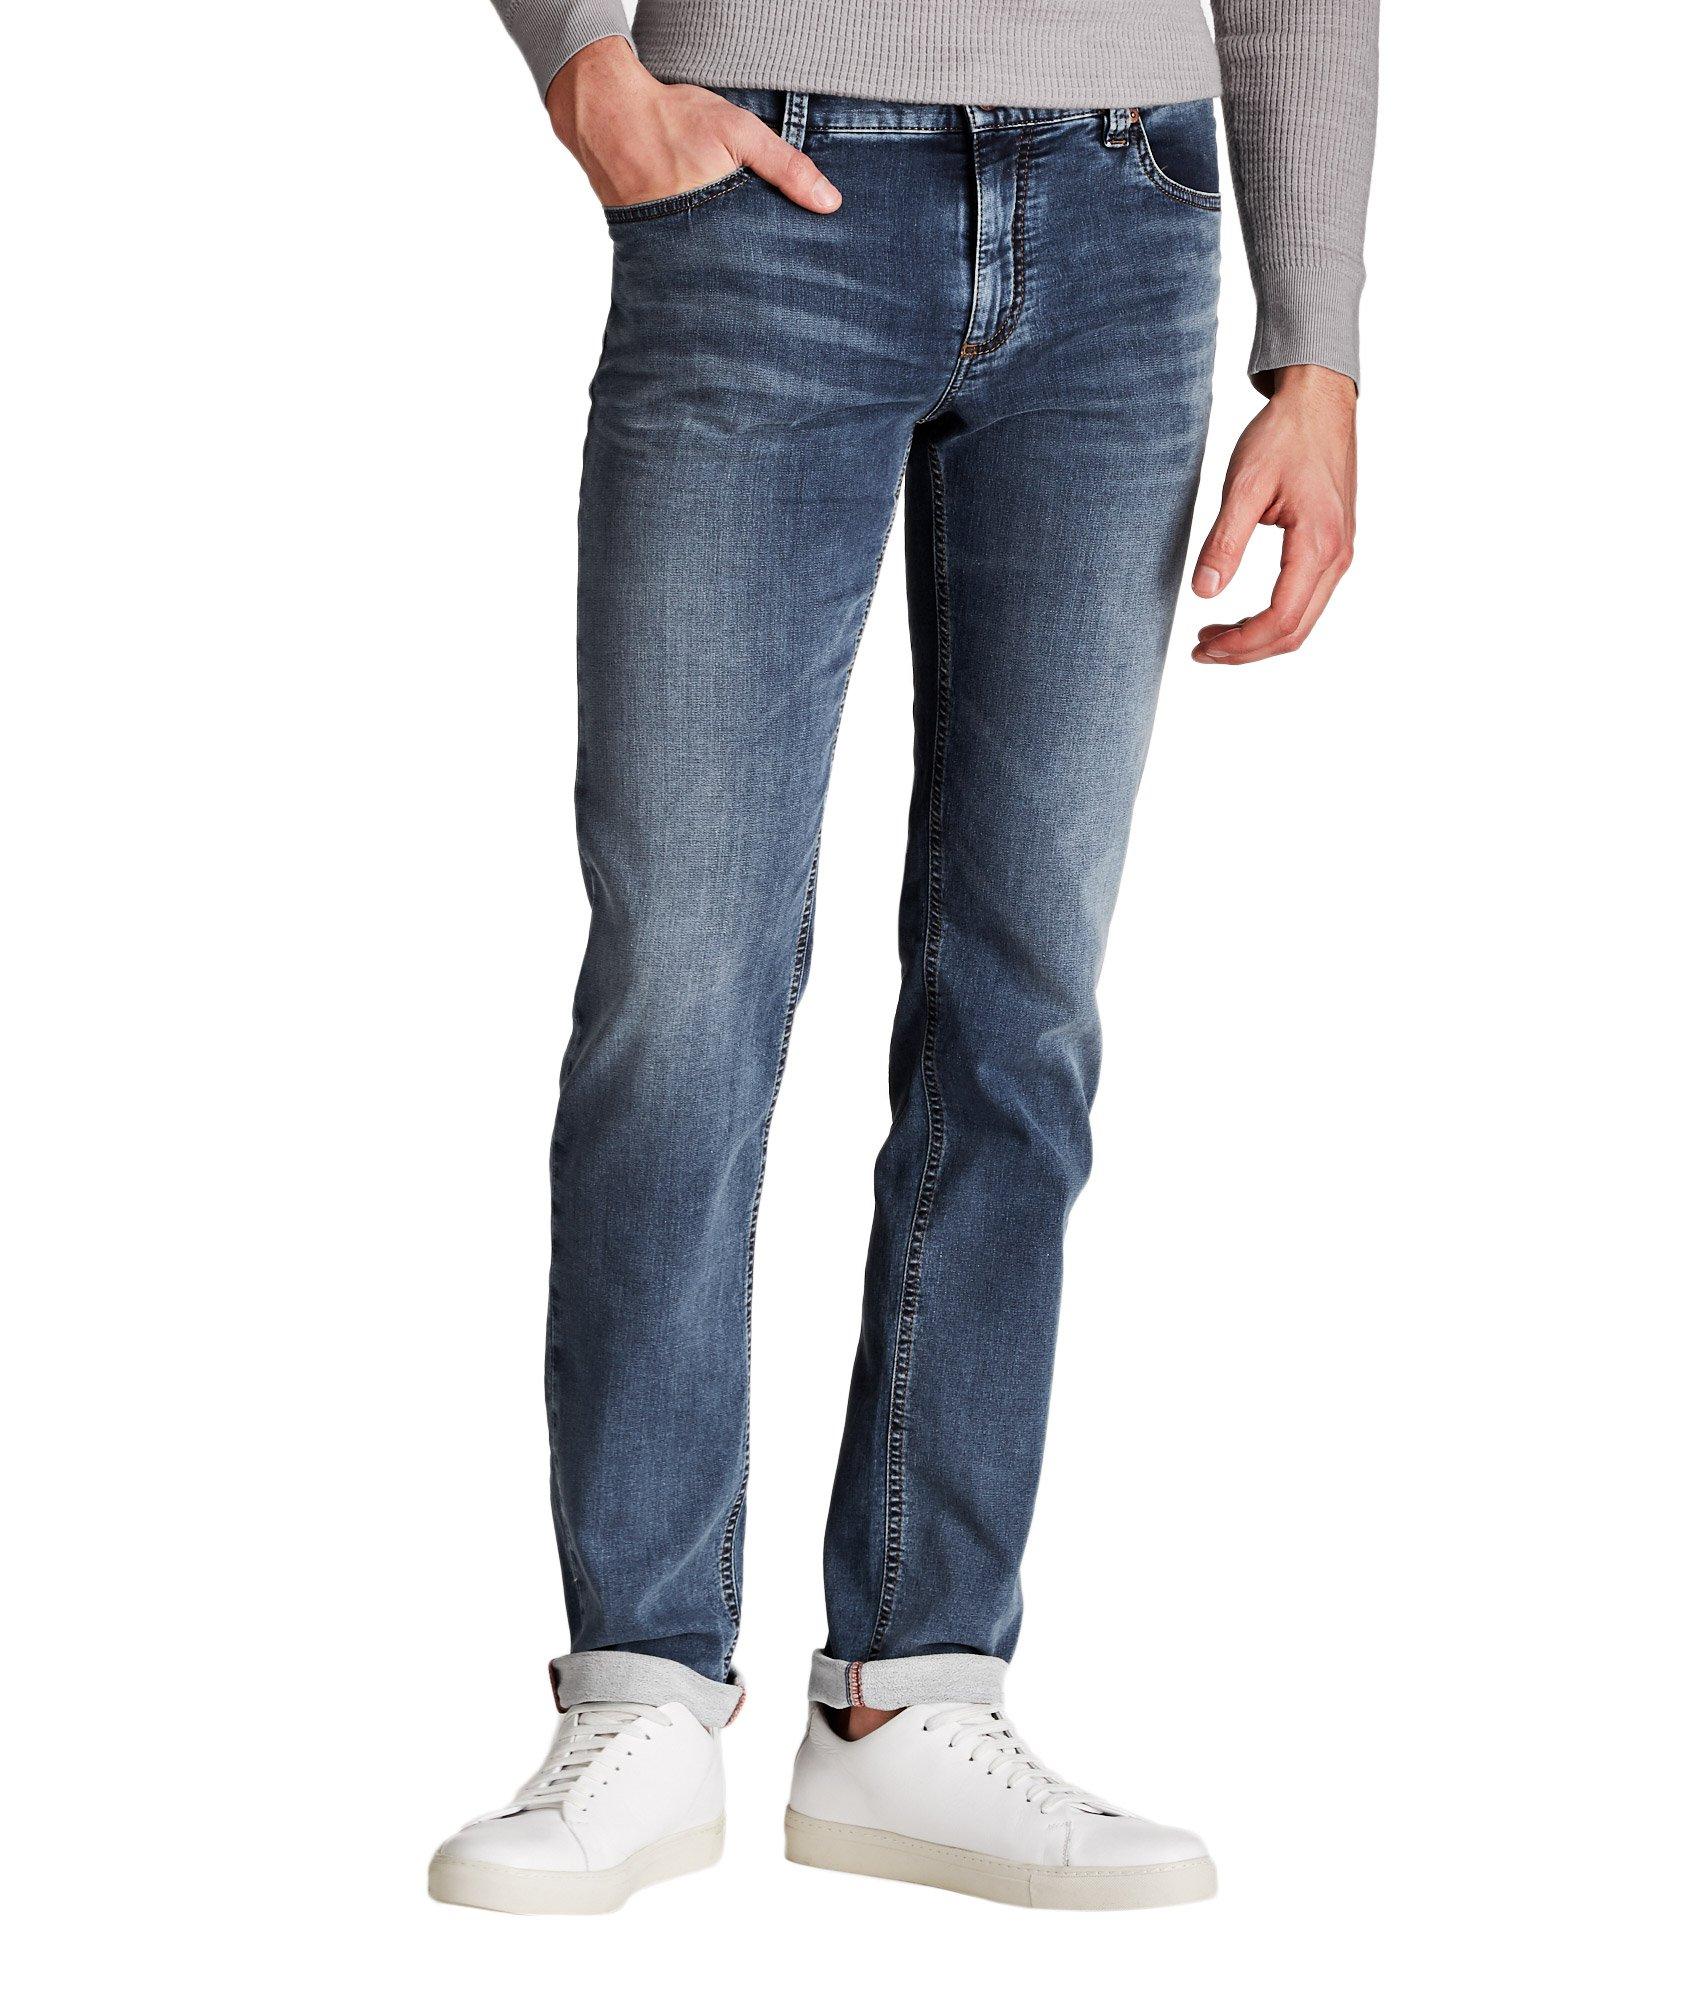 Pipe Slim Fit Cosy Jeans image 0